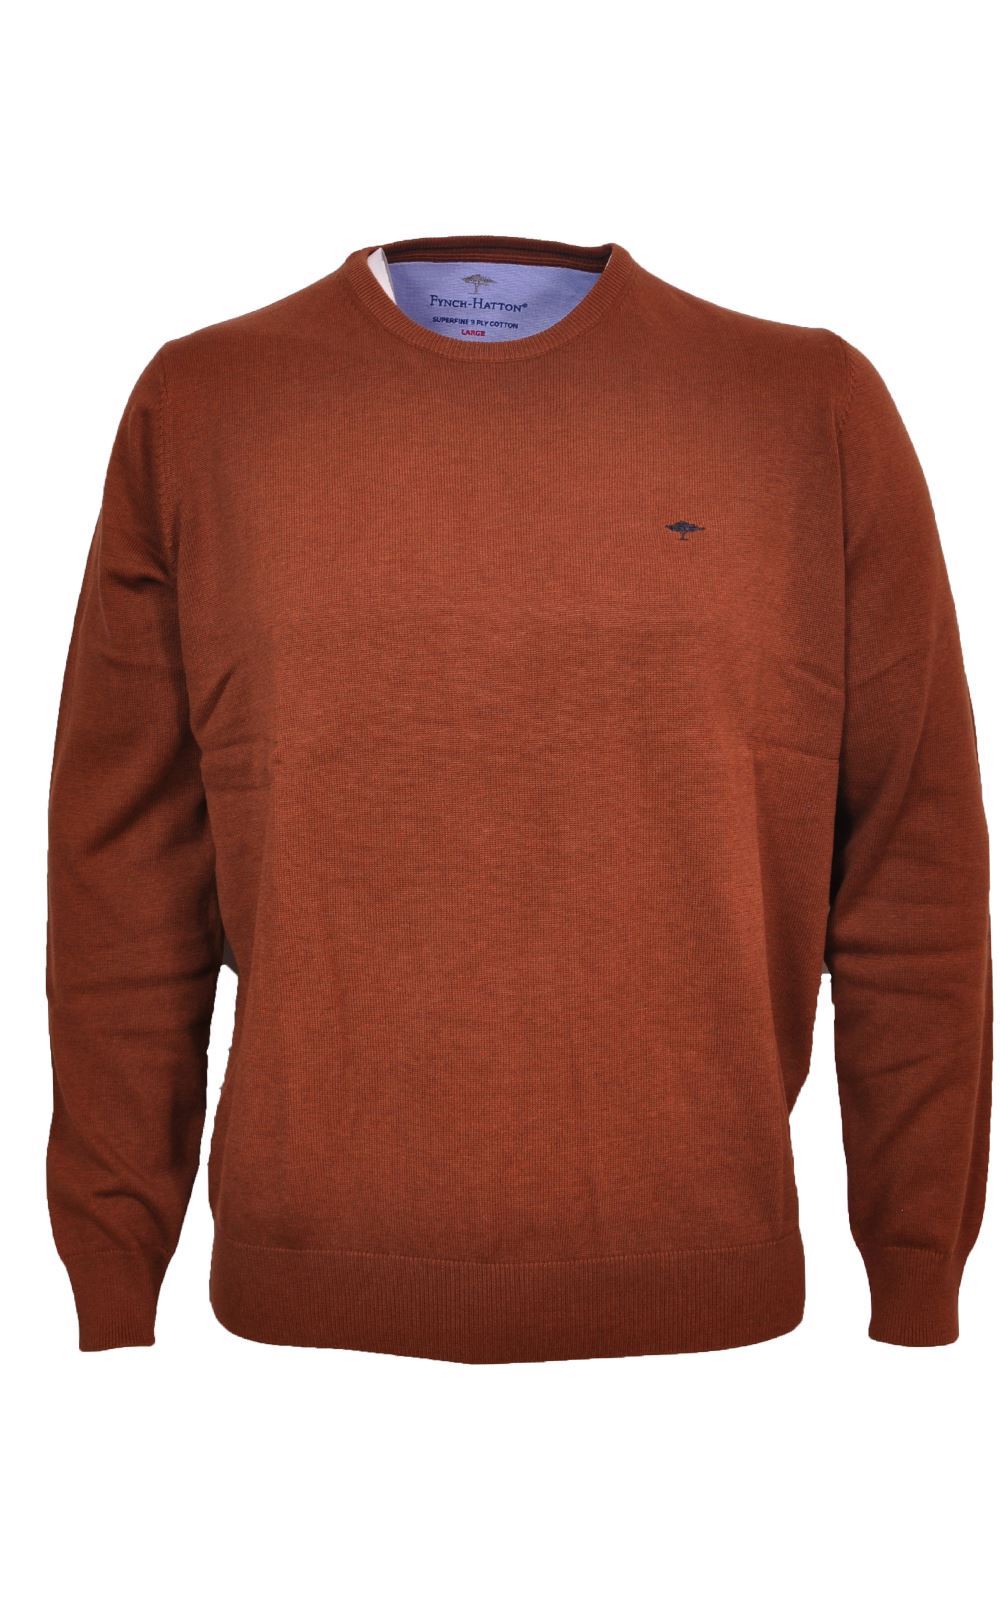 S&T Moore. Fynch-Hatton Crew Neck Pullover 1213-210